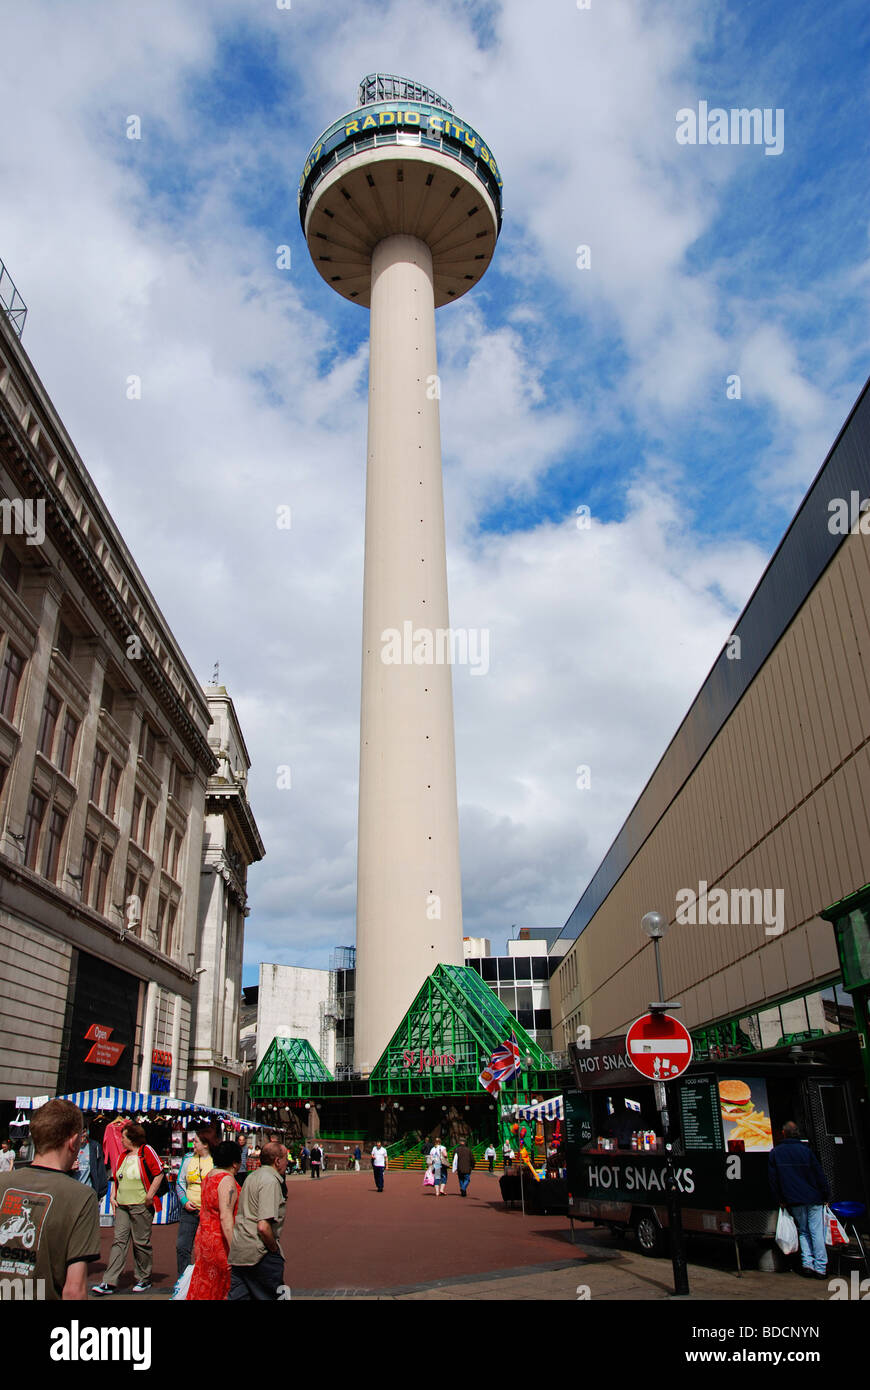 the ' radio city ' tower at st.johns market in liverpool, uk Stock Photo